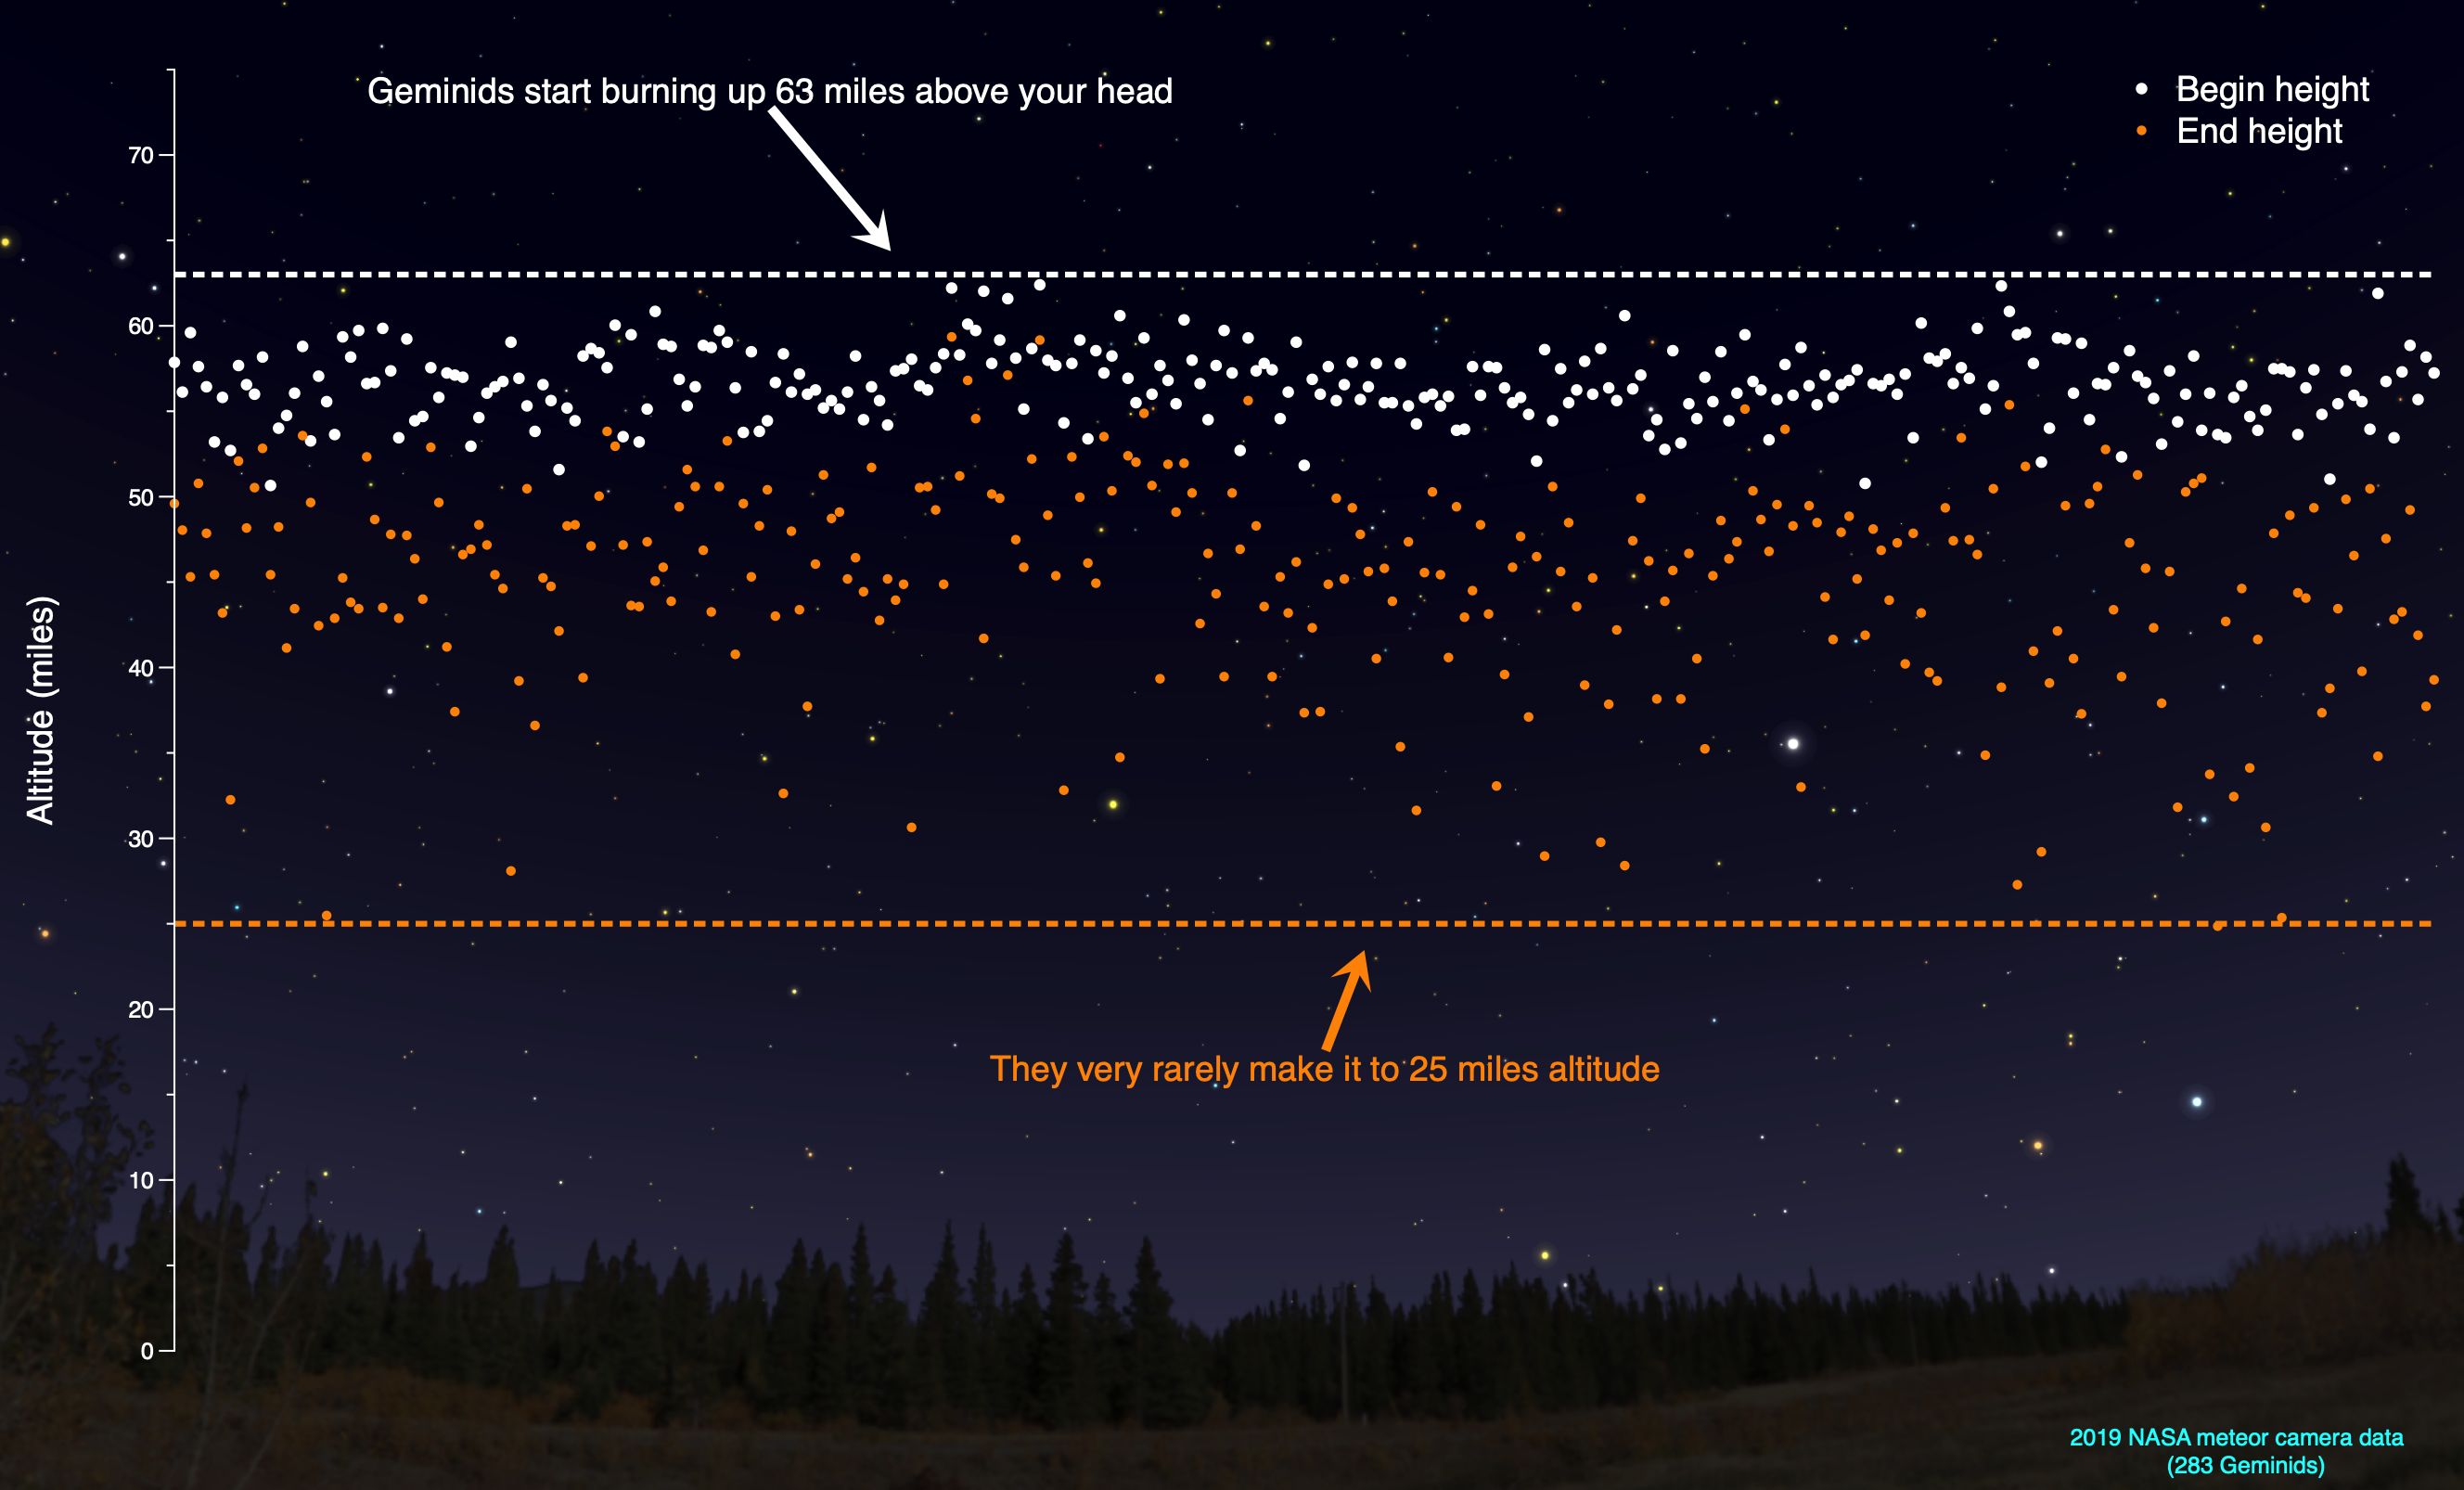 An info graphic showing the altitude of the geminids based on 2019’s meteor camera data for the Geminids. 